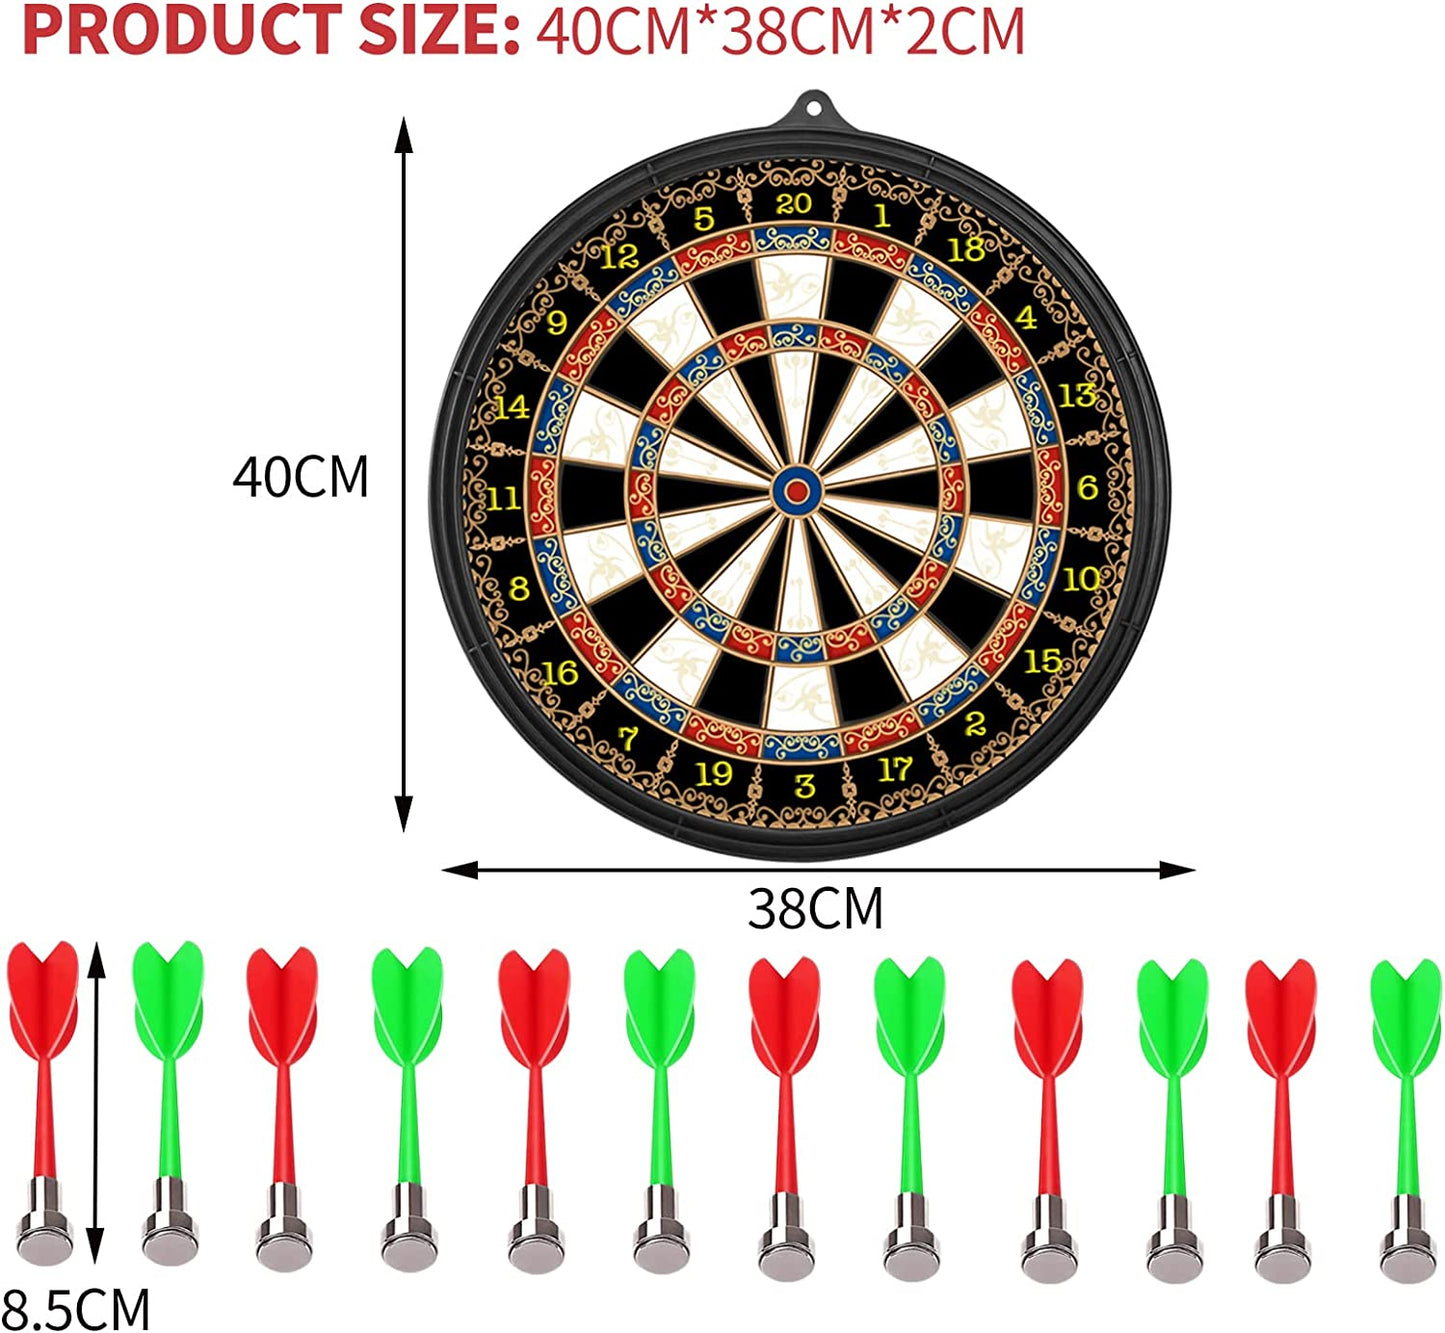 "Magnetic Dart Board - Double Side Magnetic board with 12 pcs Darts- Excellent Indoor Game and Party Games - Magnetic Dart Board Toys Gifts for 5 6 7 8 9 10 11 12 Year Old Boy Kids "